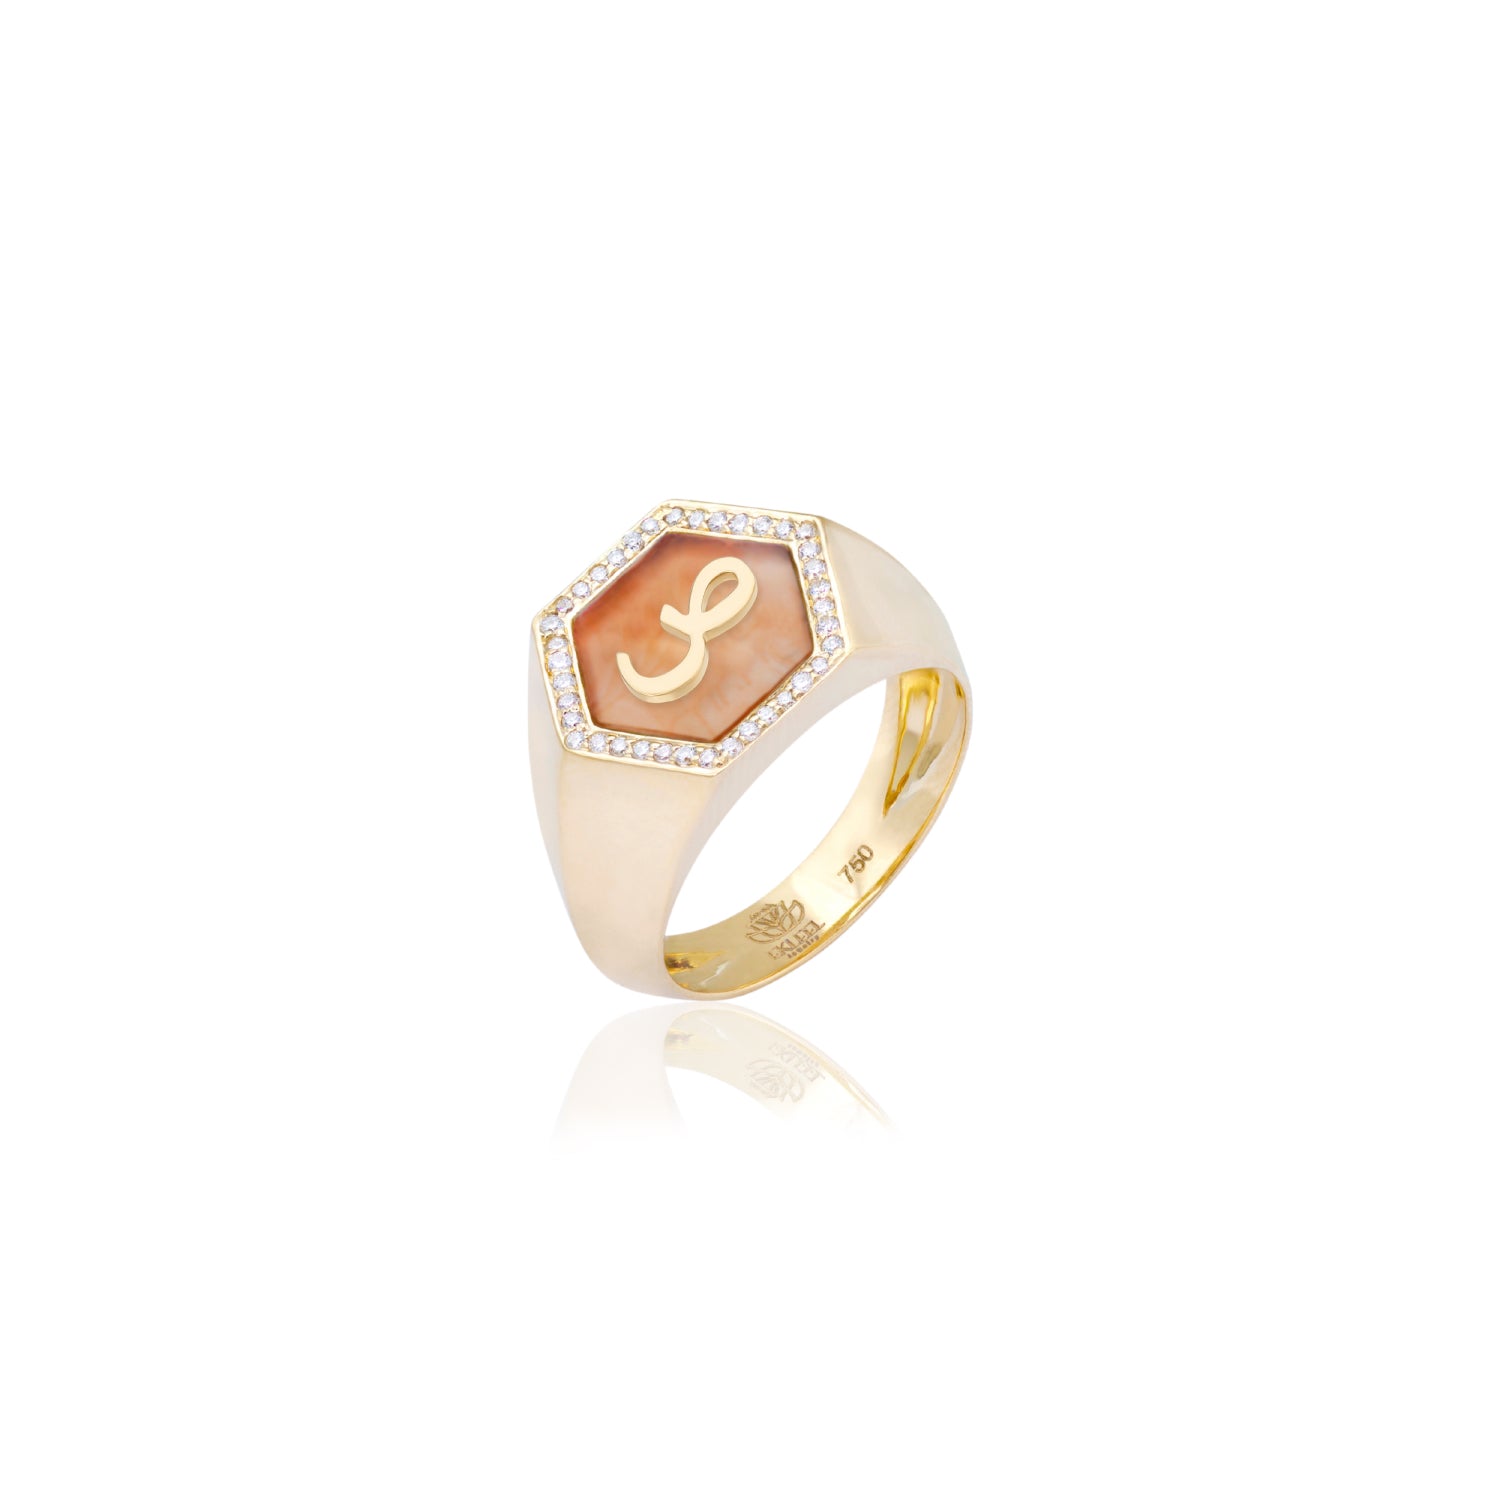 Qamoos 2.0 Letter ص Carnelian and Diamond Signet Ring in Yellow Gold